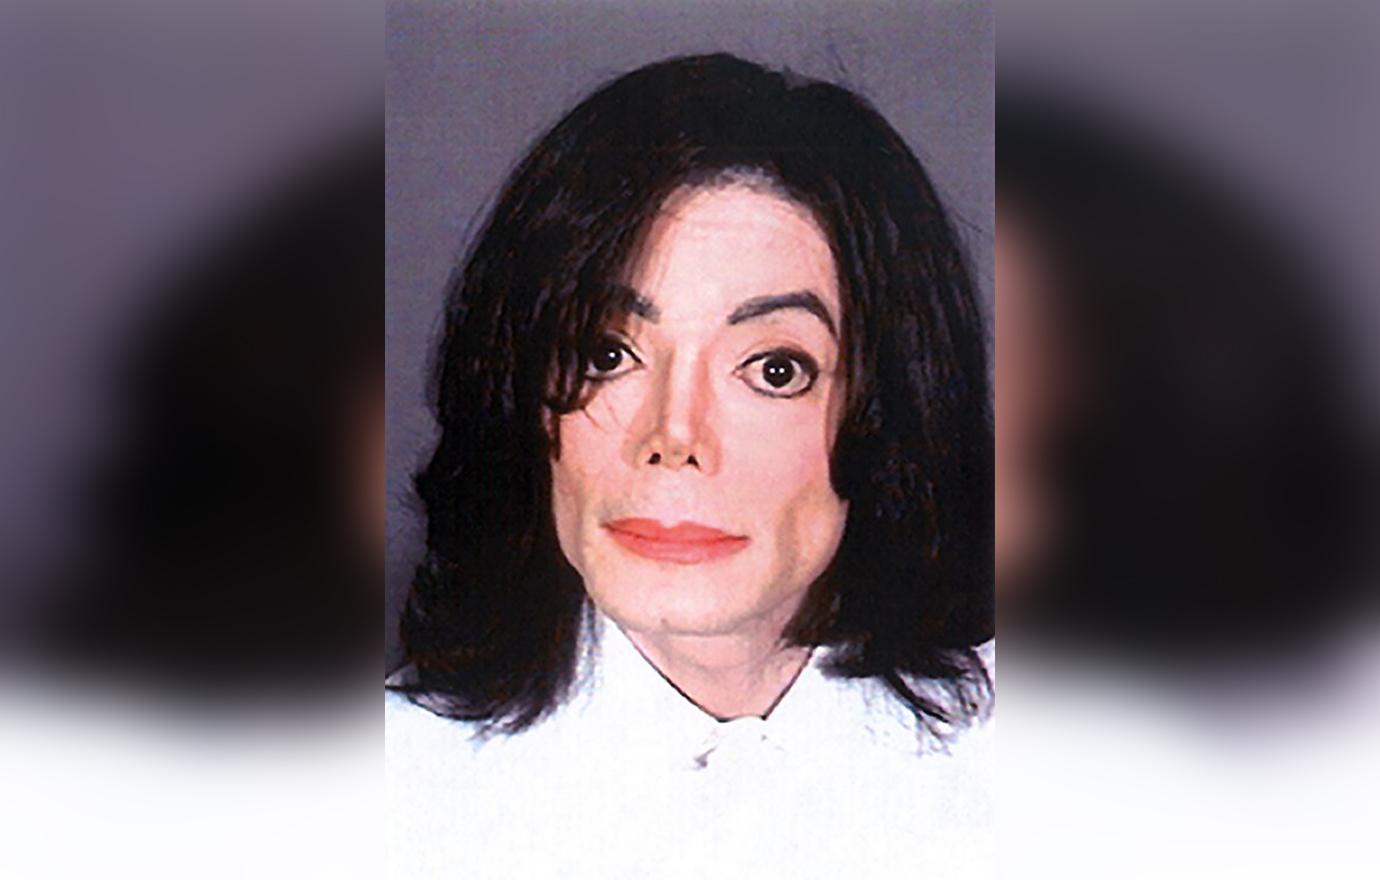 Infamous! The Greatest Celebrity Mugshots Of All Time